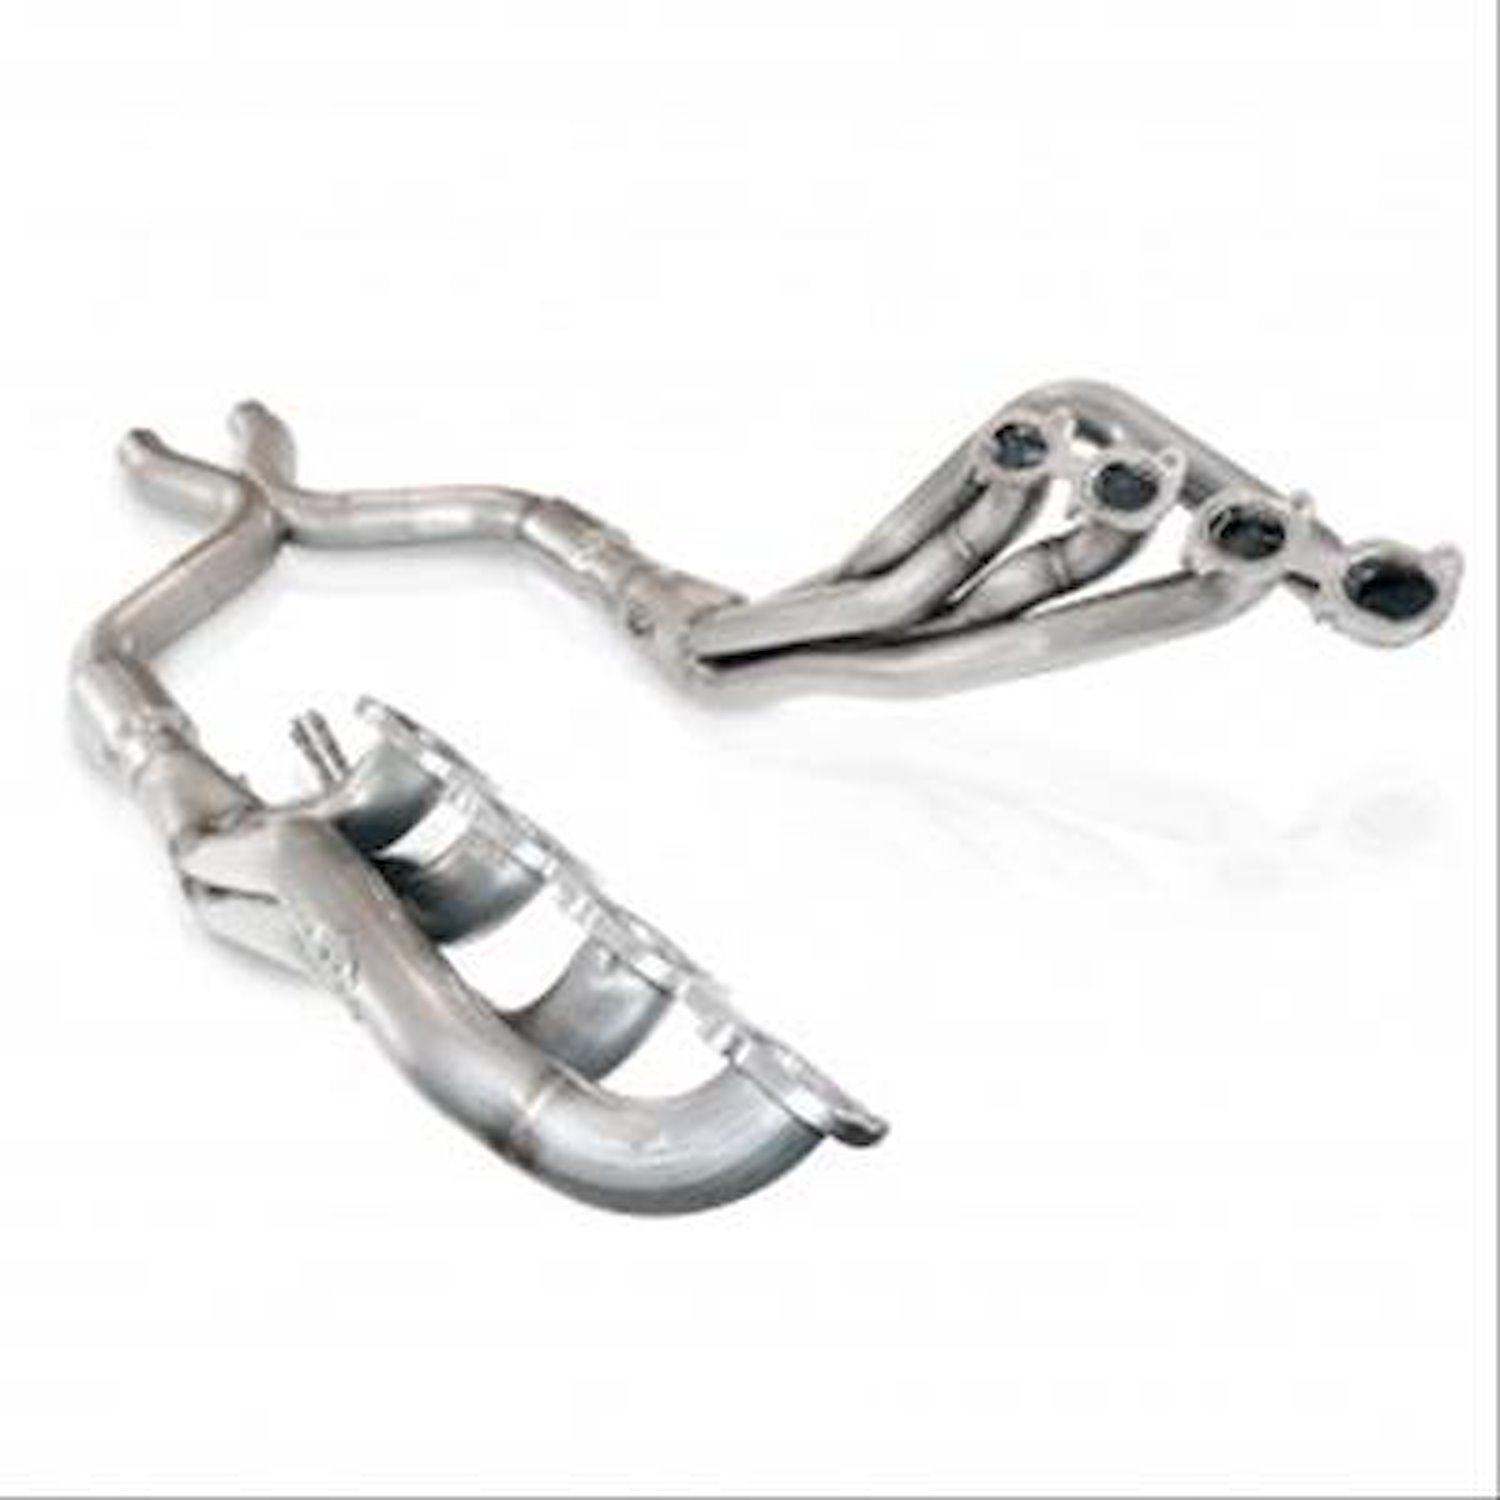 2007-2010 Shelby GT500 1 7/8 headers with lead